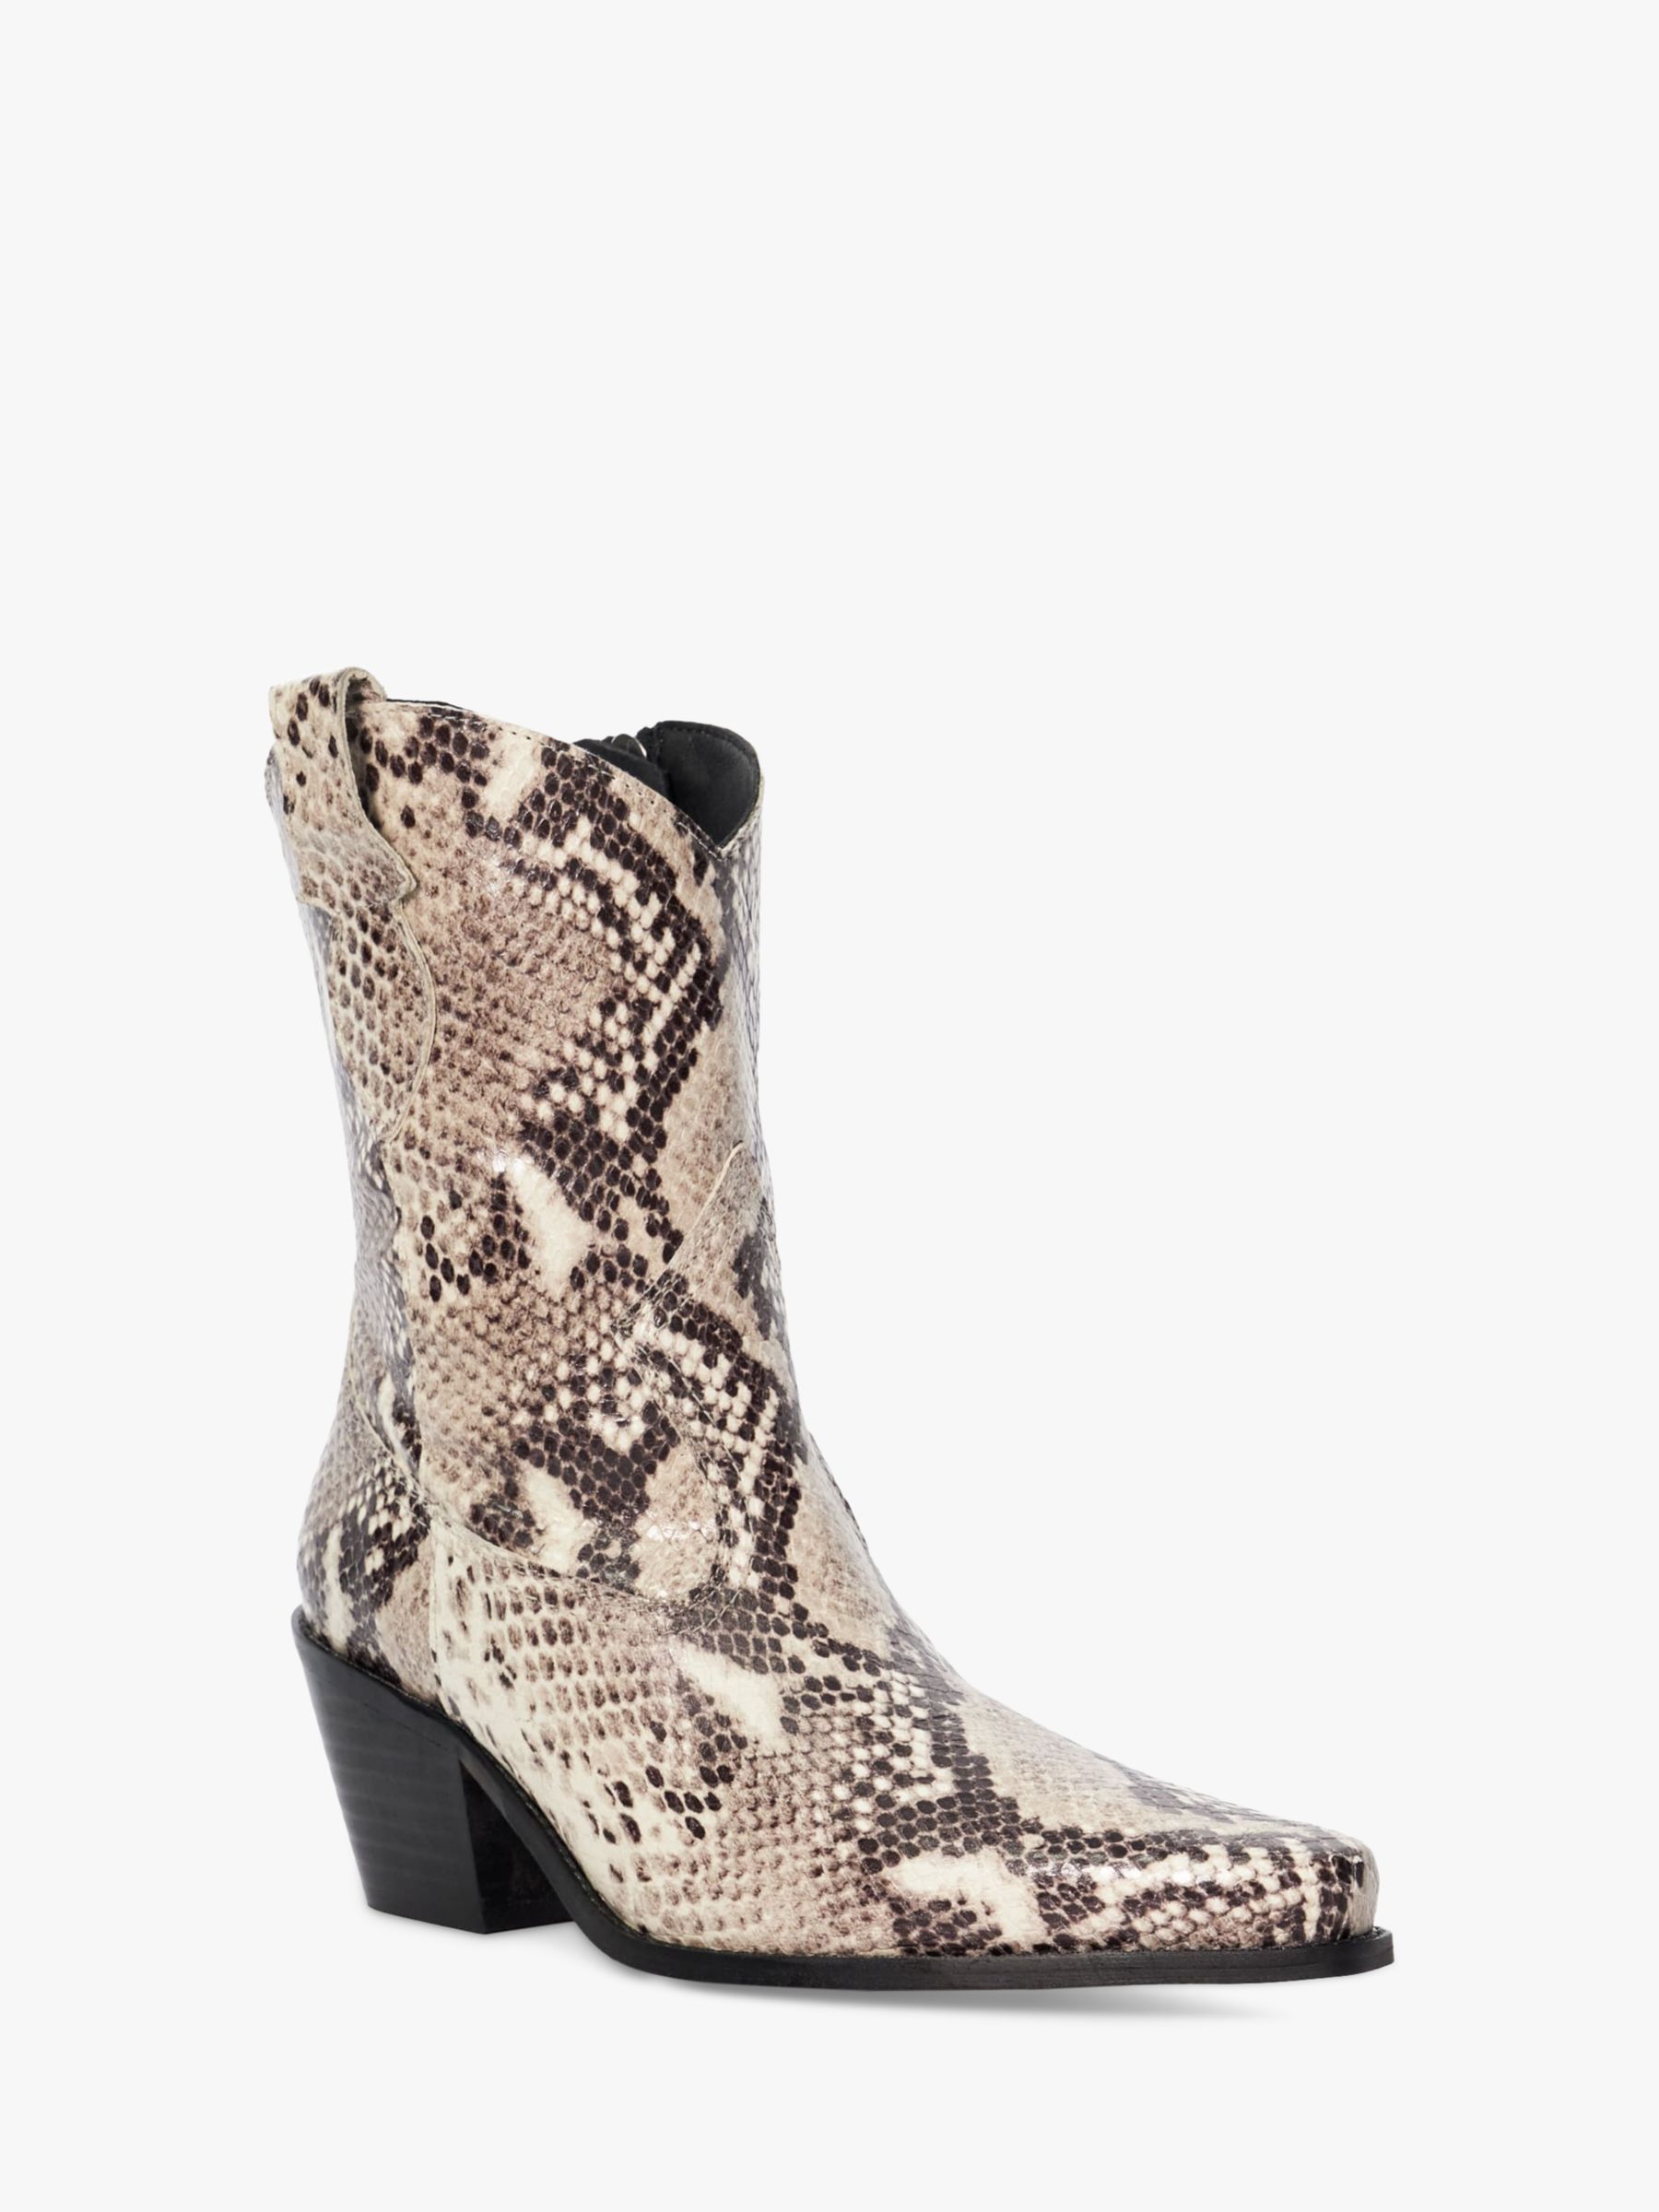 Buy Dune Pardner 2 Leather Western Boots, Reptile Online at johnlewis.com